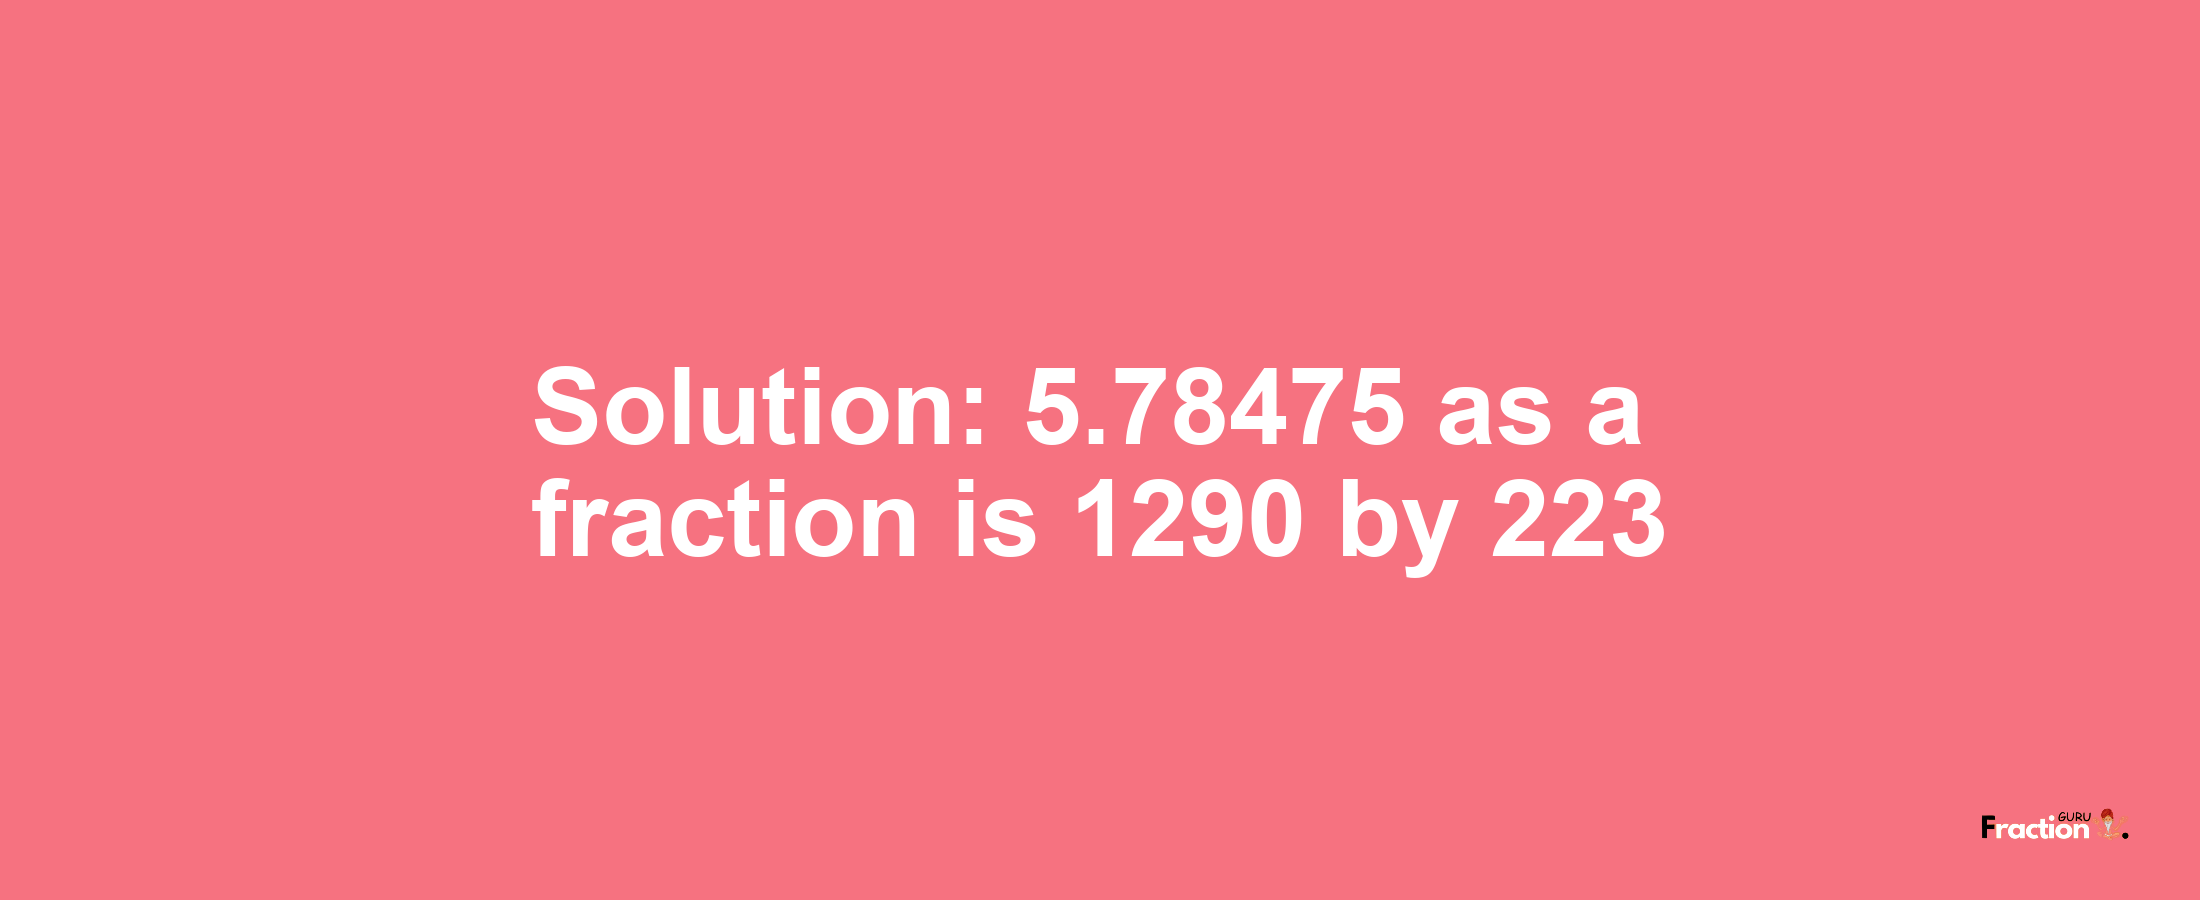 Solution:5.78475 as a fraction is 1290/223